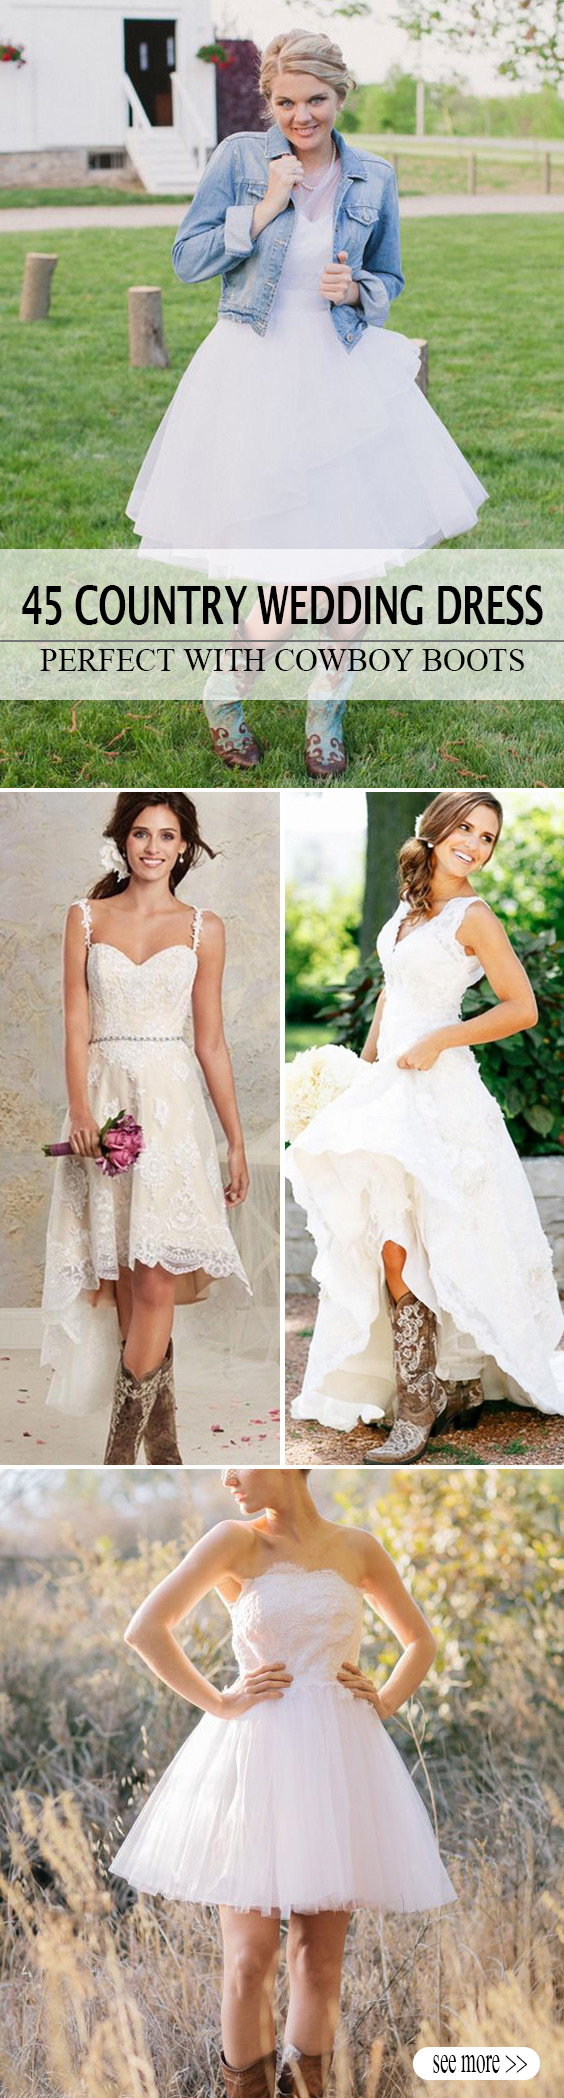 long bridesmaid dresses with boots